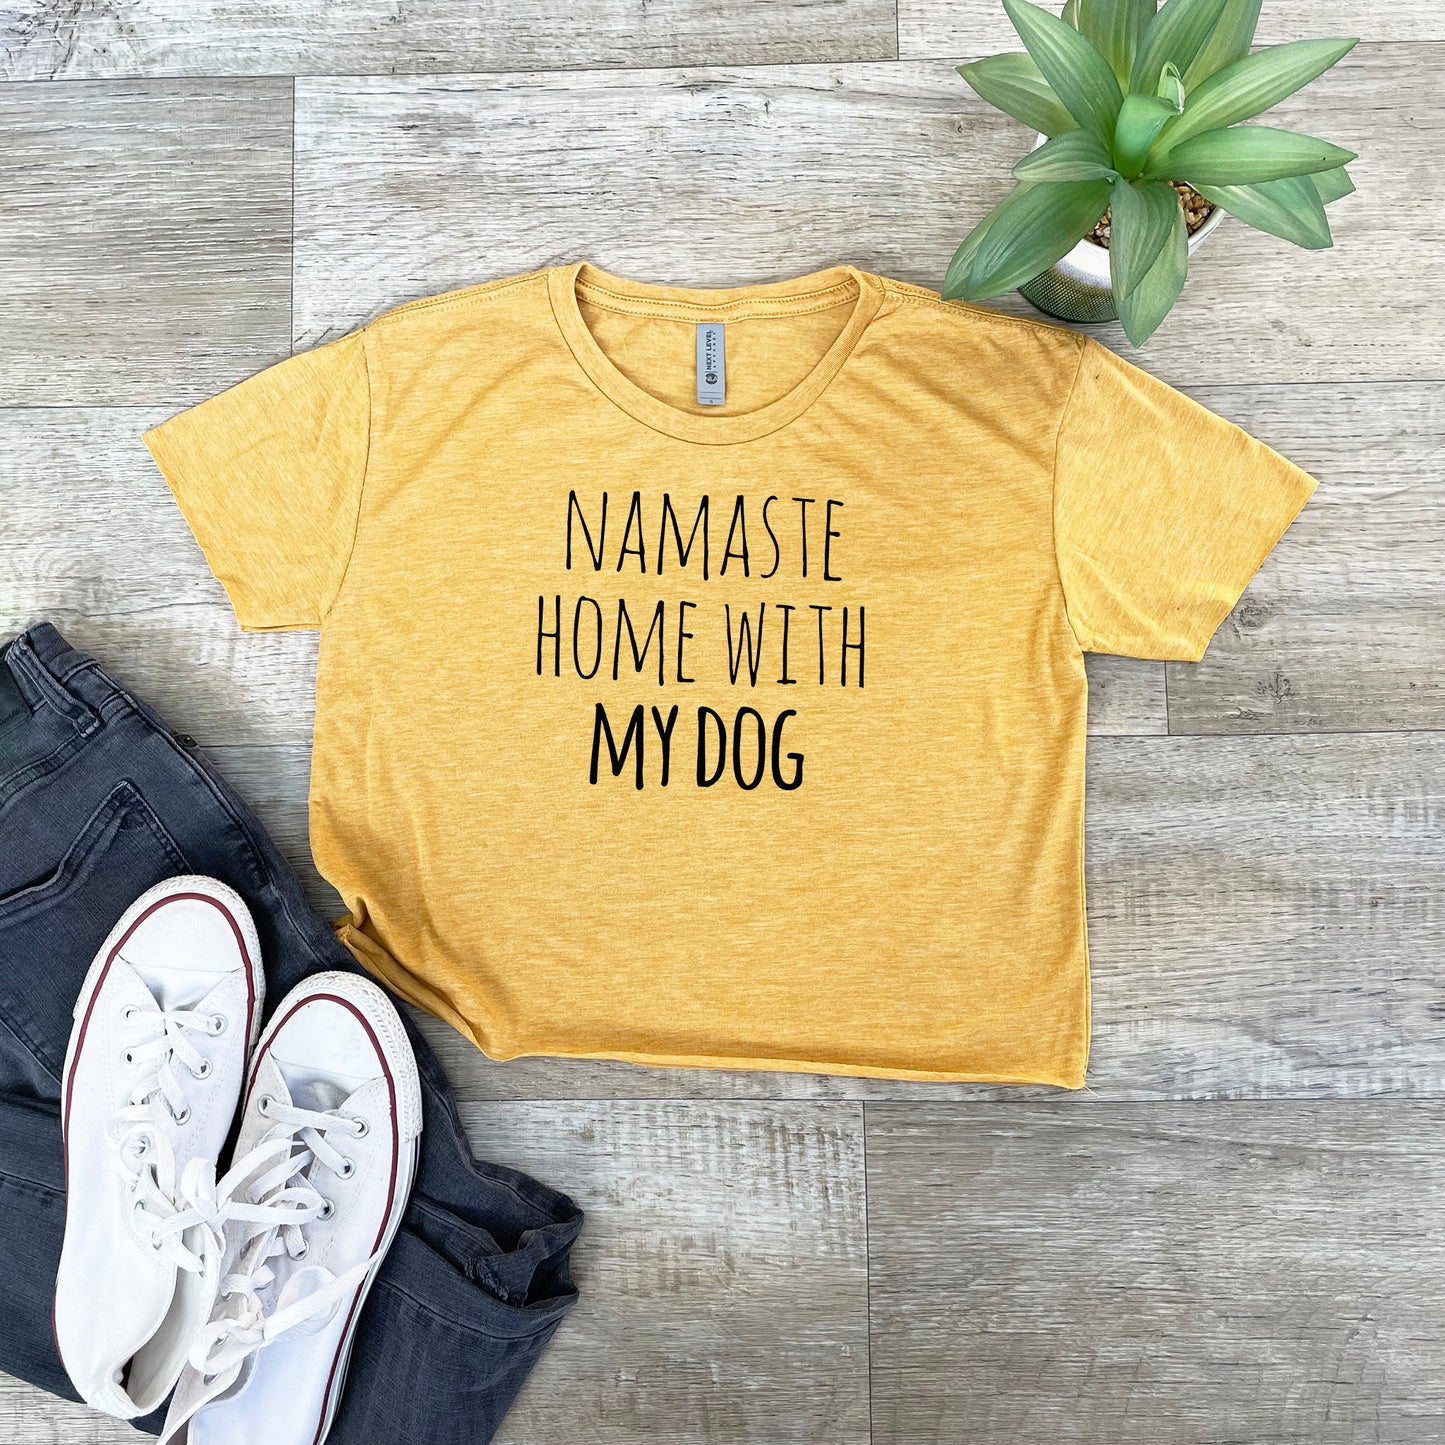 Namaste Home With My Dog - Women's Crop Tee - Heather Gray or Gold